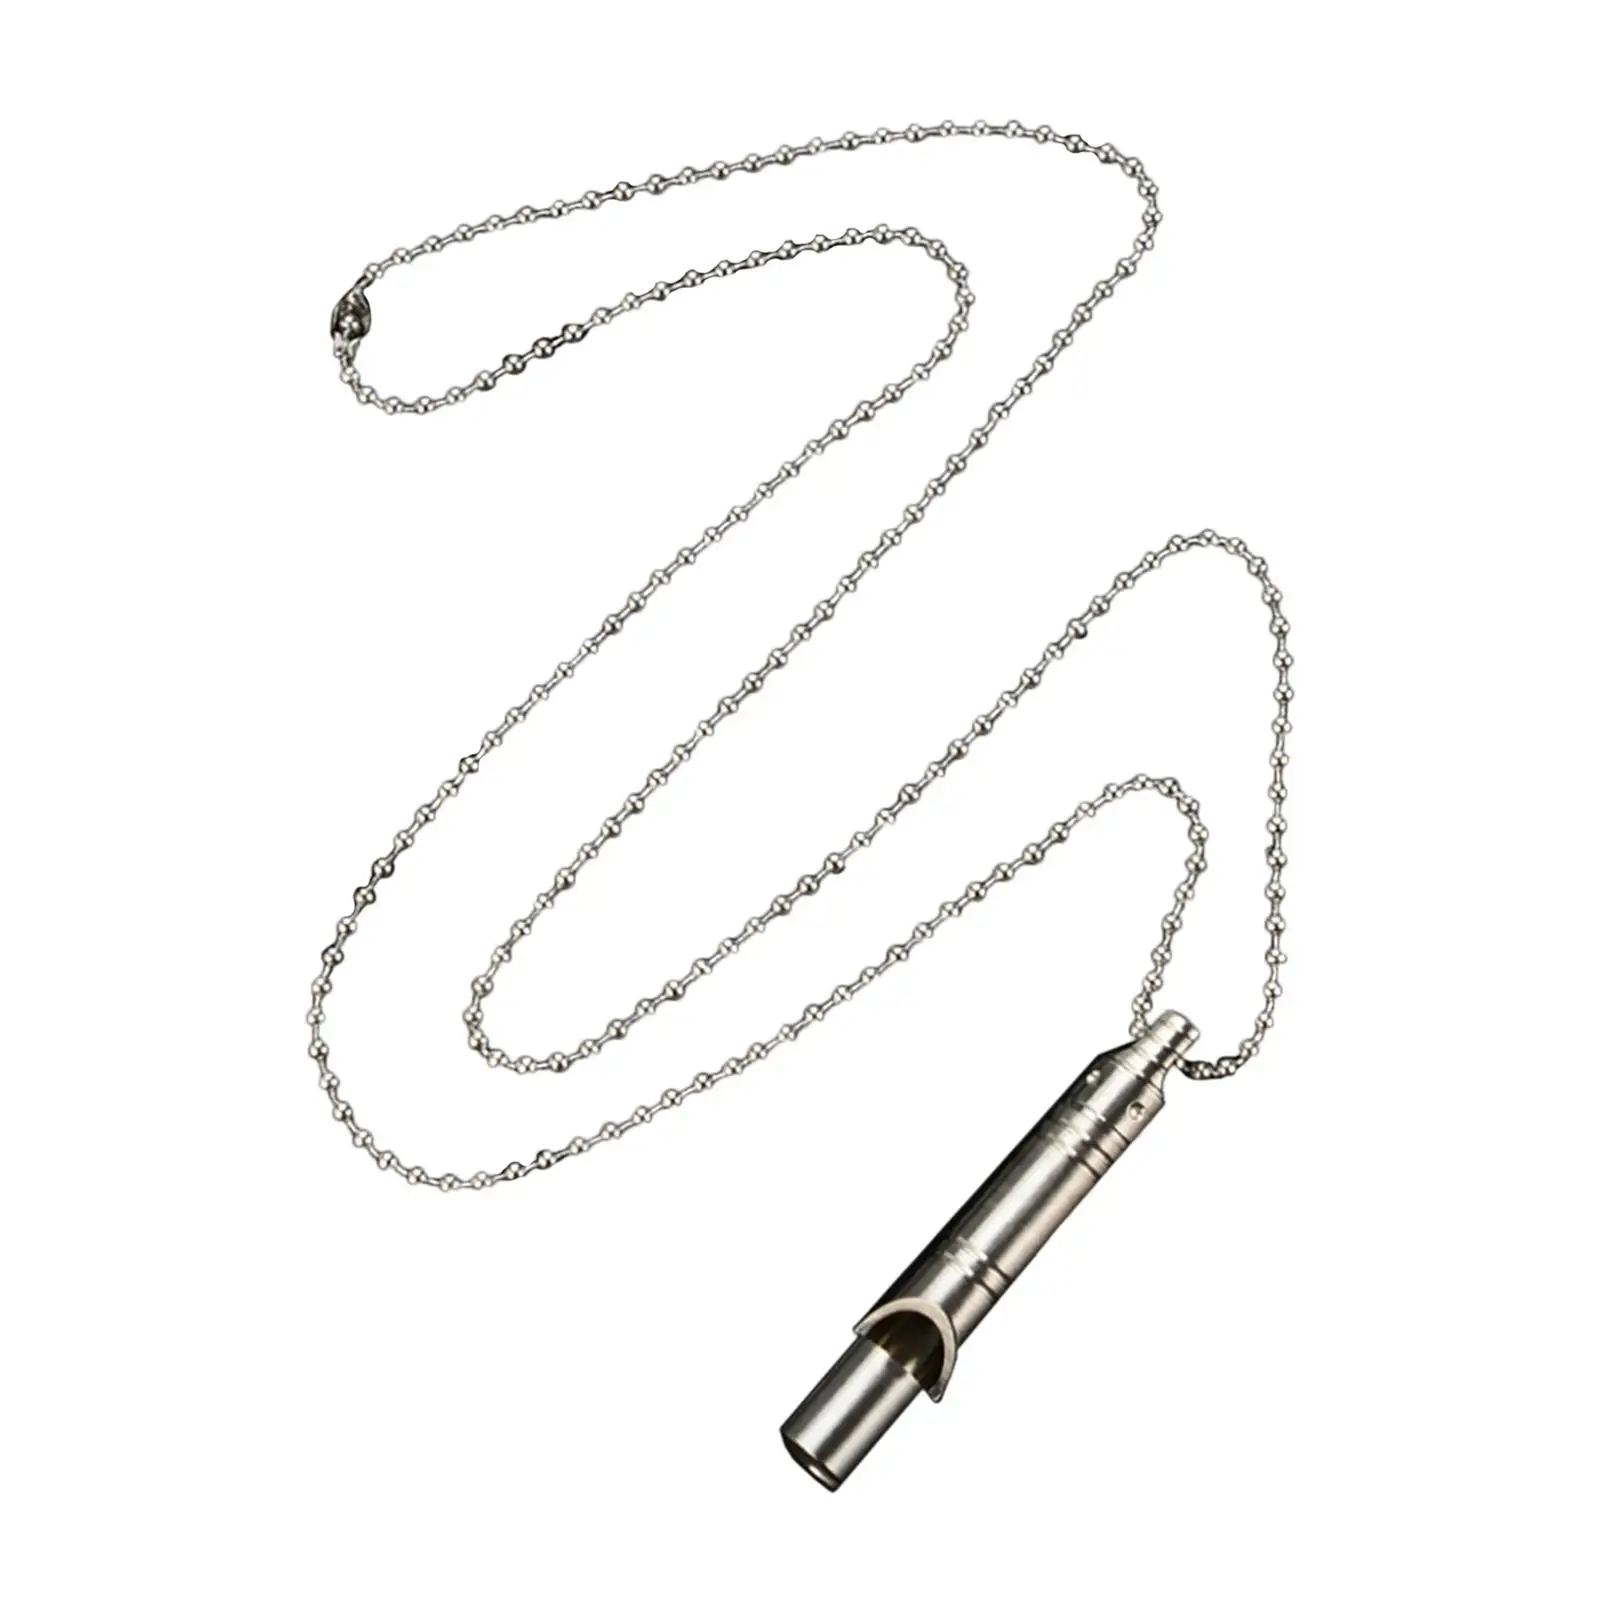 Survival Whistle Stainless Steel Chain Pet Training Outdoor Necklace Whistle for Outdoor Fishing Hiking Emergency Hunting